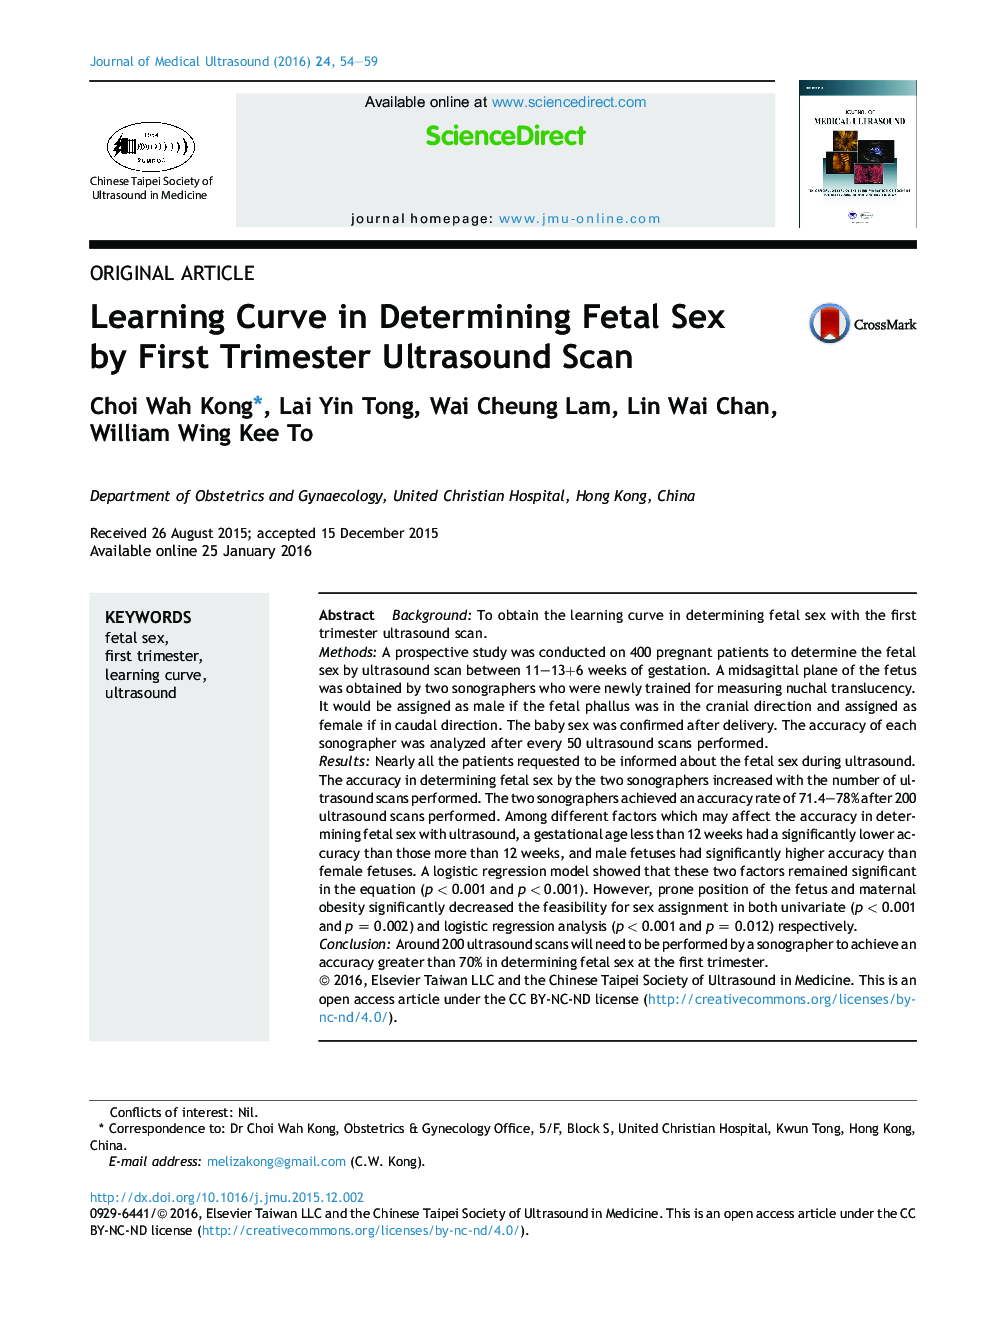 Learning Curve in Determining Fetal Sex by First Trimester Ultrasound Scan 